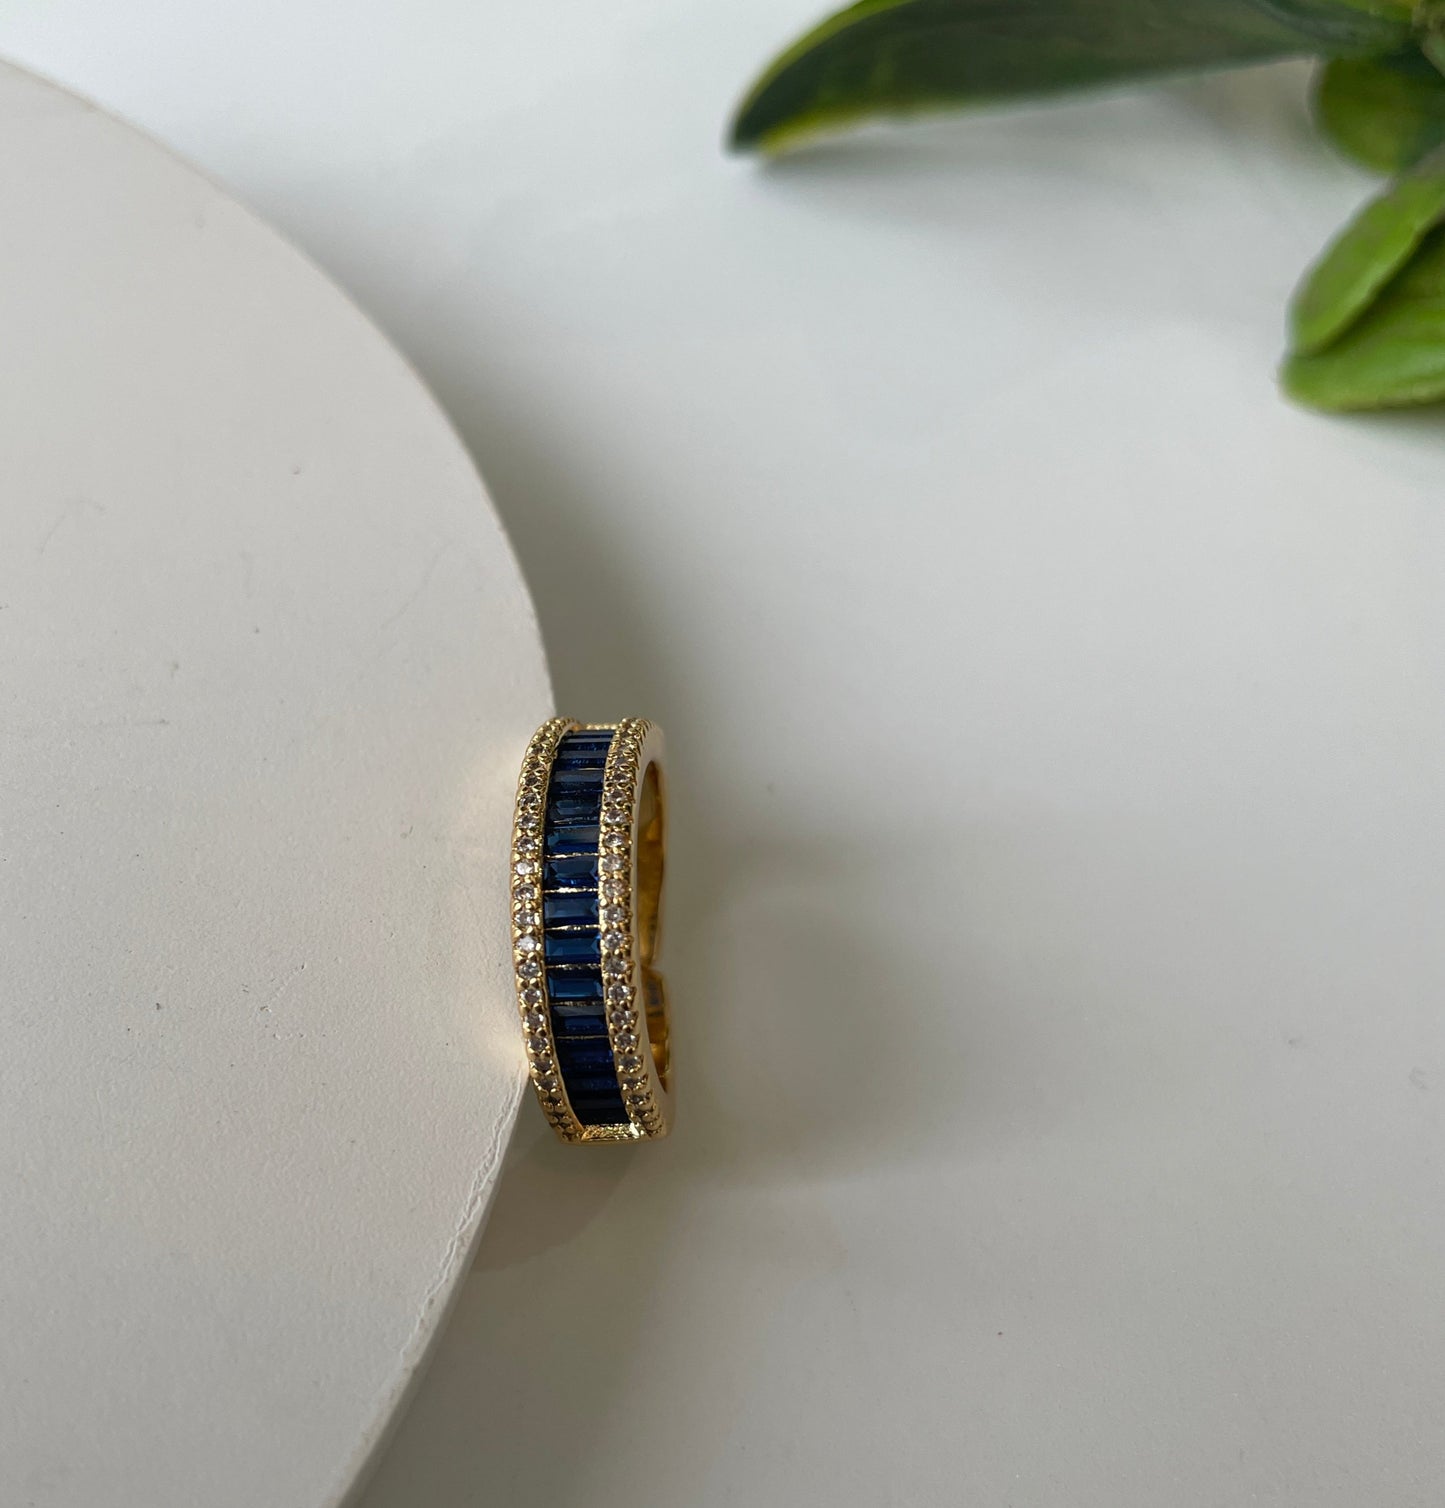 Gold Finish Zircon Studded Ring with Baguette Stones